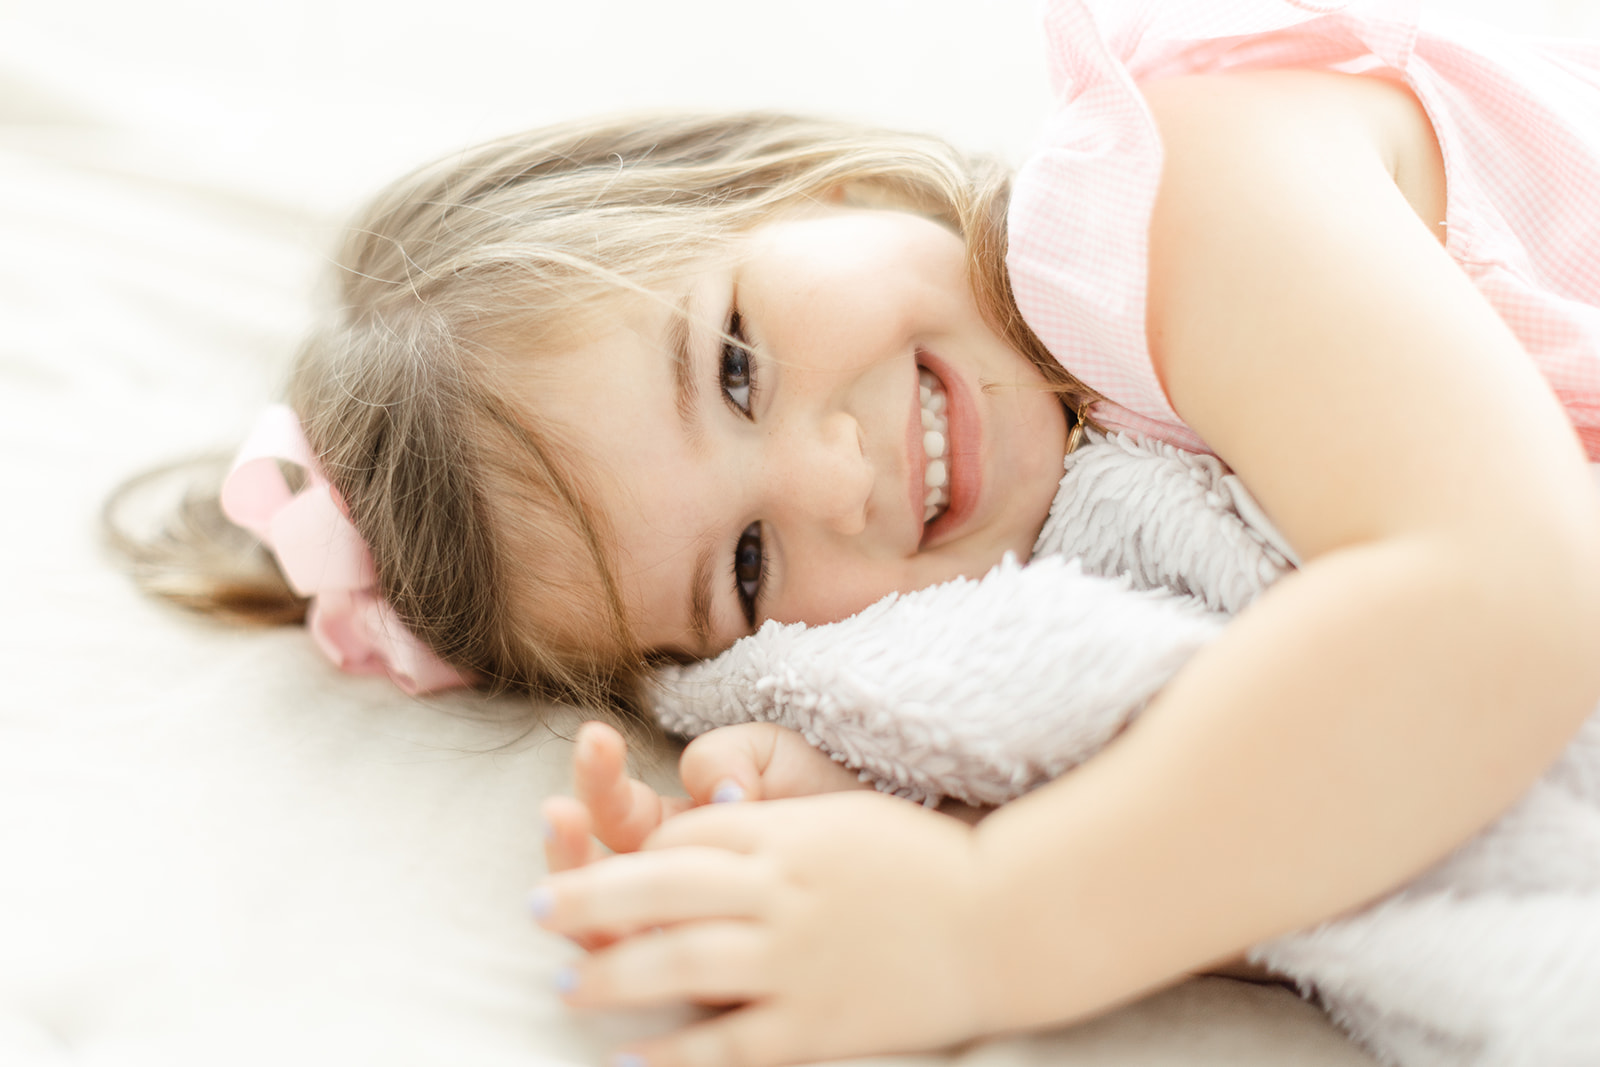 A toddler girl in a pink dress smiles big while playing on the floor with a blanket